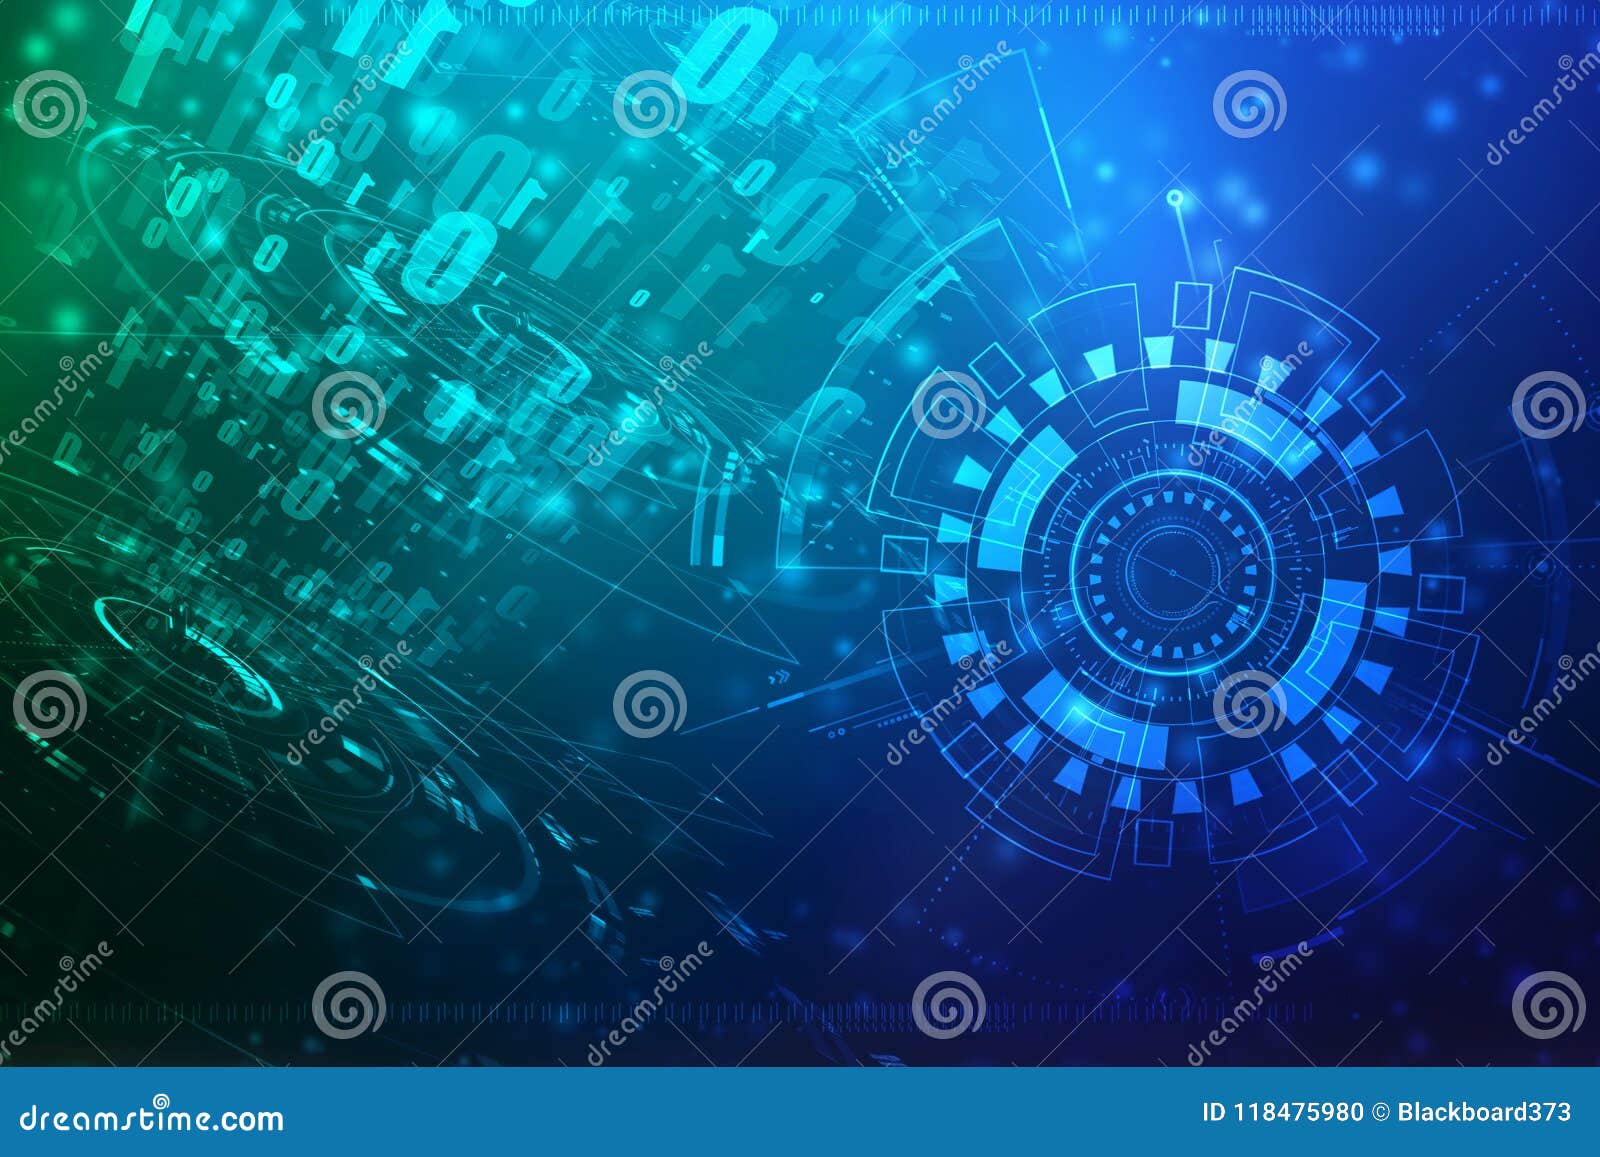 digital abstract technology background, binary background, futuristic background